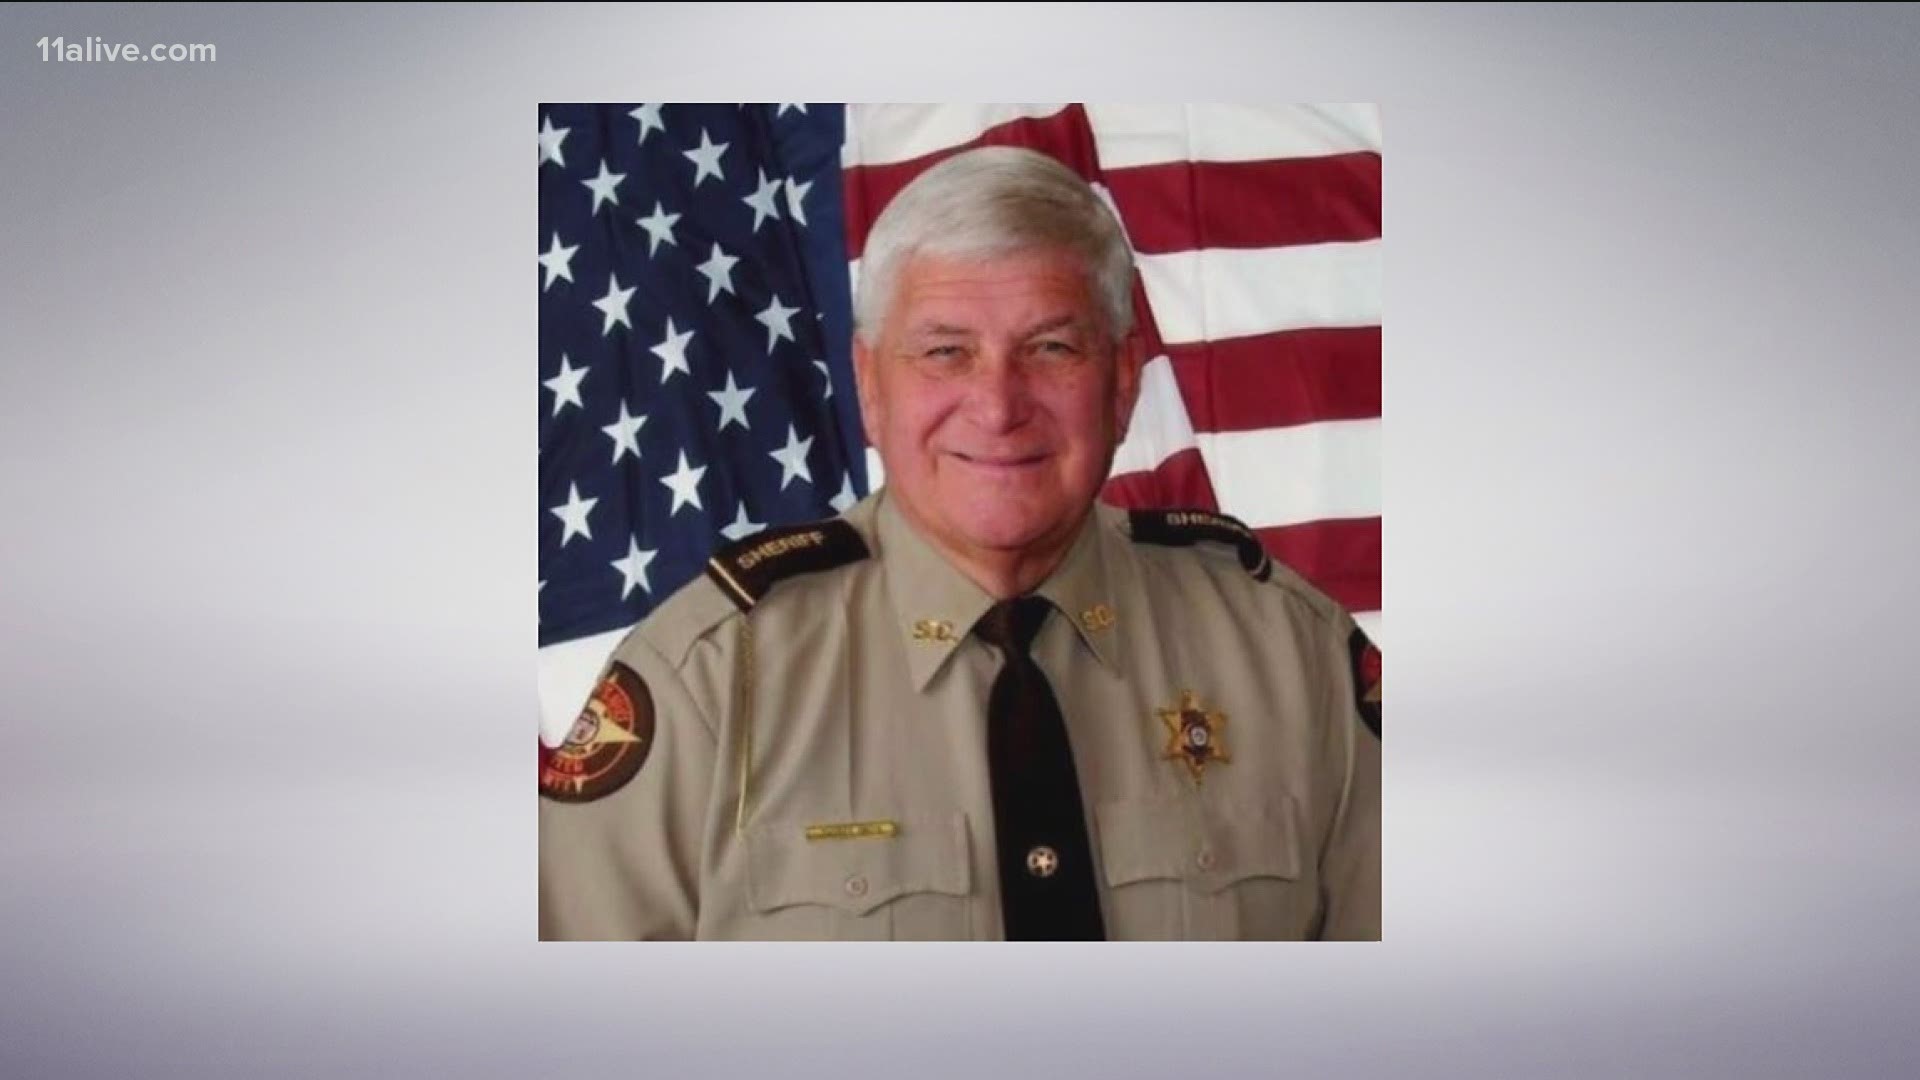 Sheriff Pete Smith served as the sheriff of Sumter County since his 2004 election.